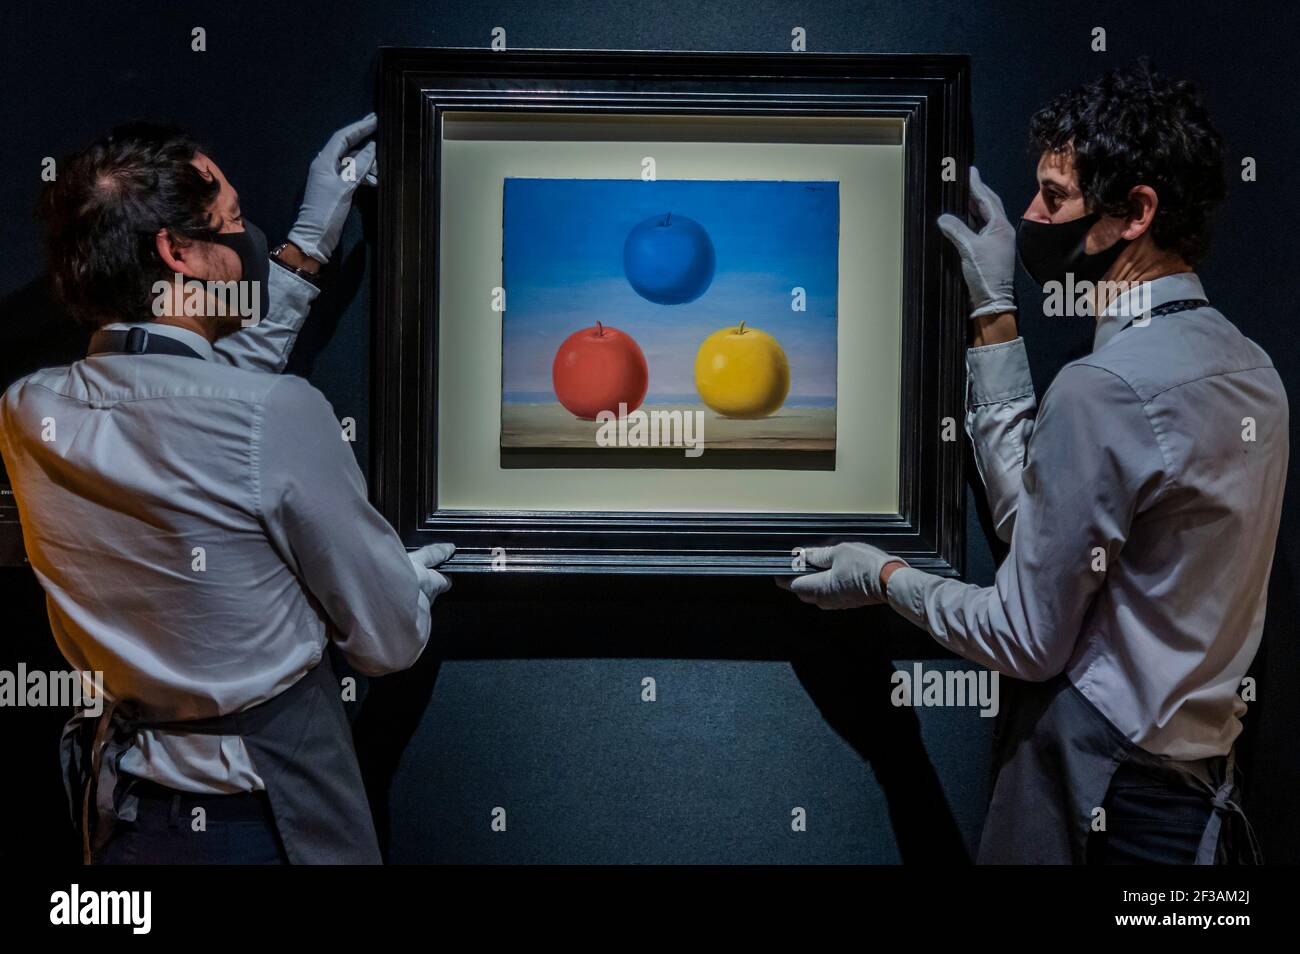 London, UK. 16th Mar, 2021. René Magritte, Les jeunes amours, Painted in 1963 Estimate: £2,000,000-3,000,000 - Behind closed doors: preparations take place at christie's ahead of the livestreamed 20th century art evening sale and the art of the surreal sale on 23 march Credit: Guy Bell/Alamy Live News Stock Photo